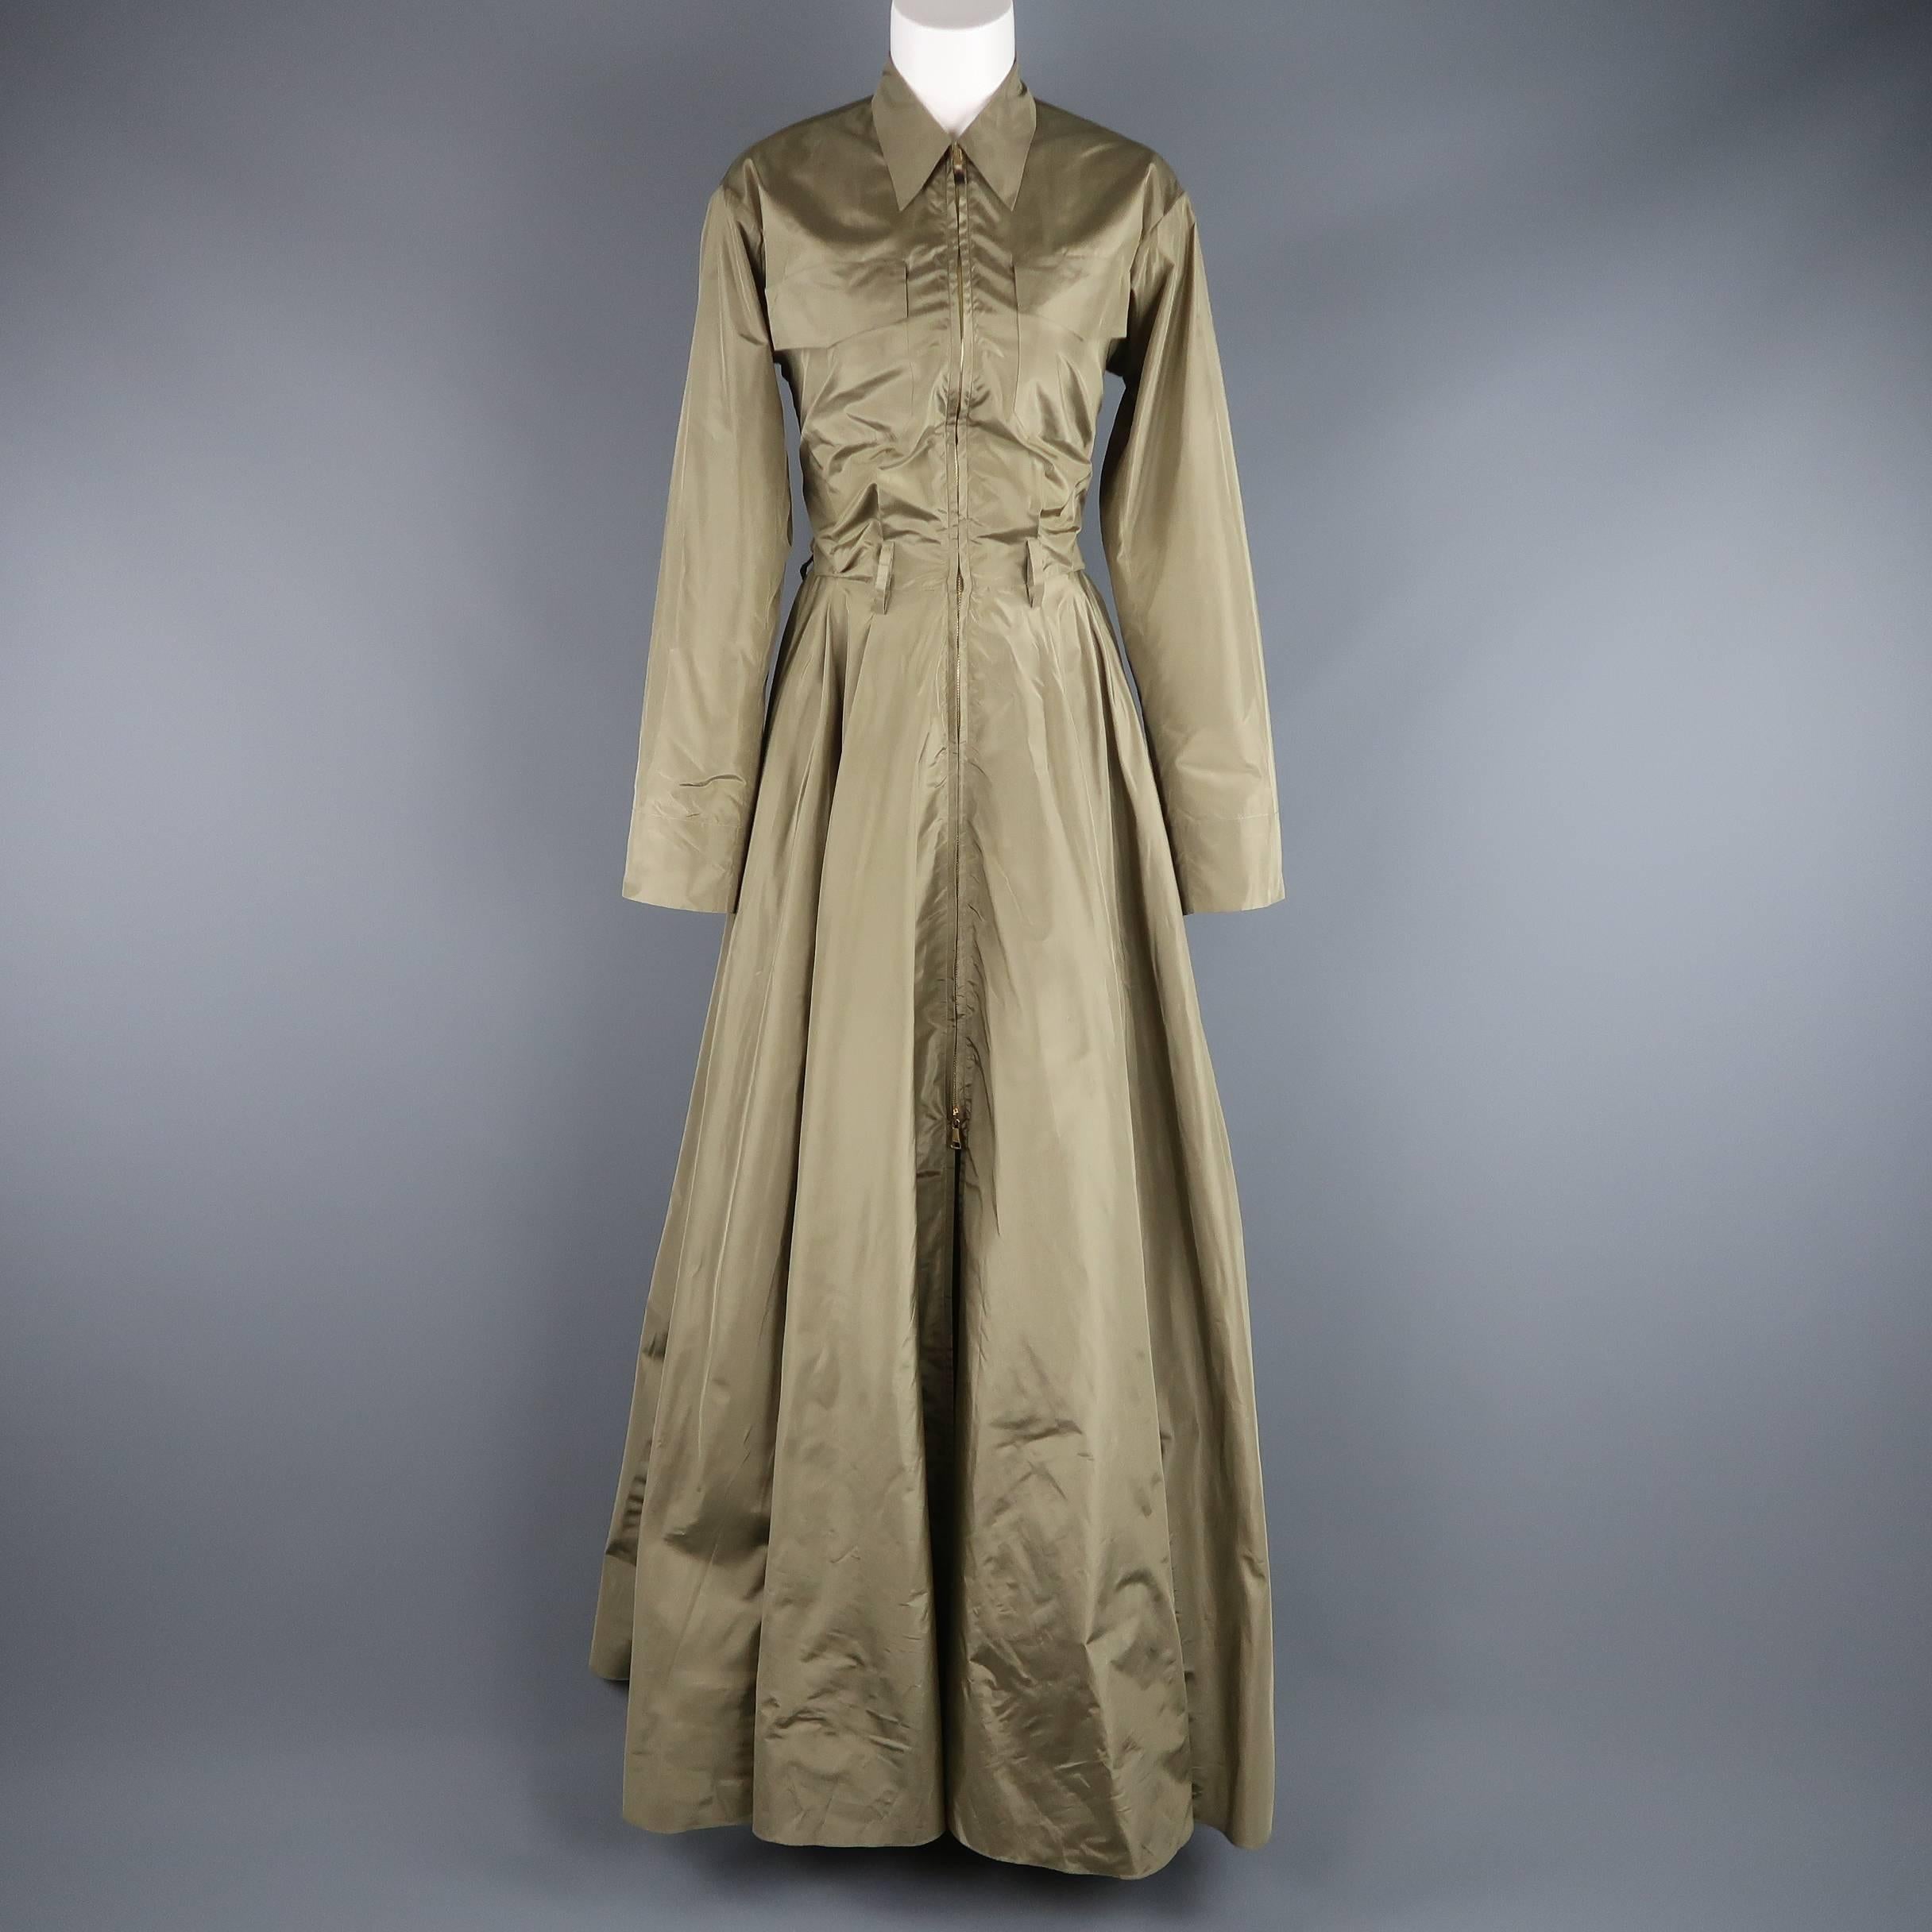 RALPH LAUREN COLLECTION Sahara evening gown comes in a light weight, muted olive green silk taffeta with a safari shirt top, zip front, belt looped waist with gathered stretch panel back, and full length parachute skirt with half slit front. Without